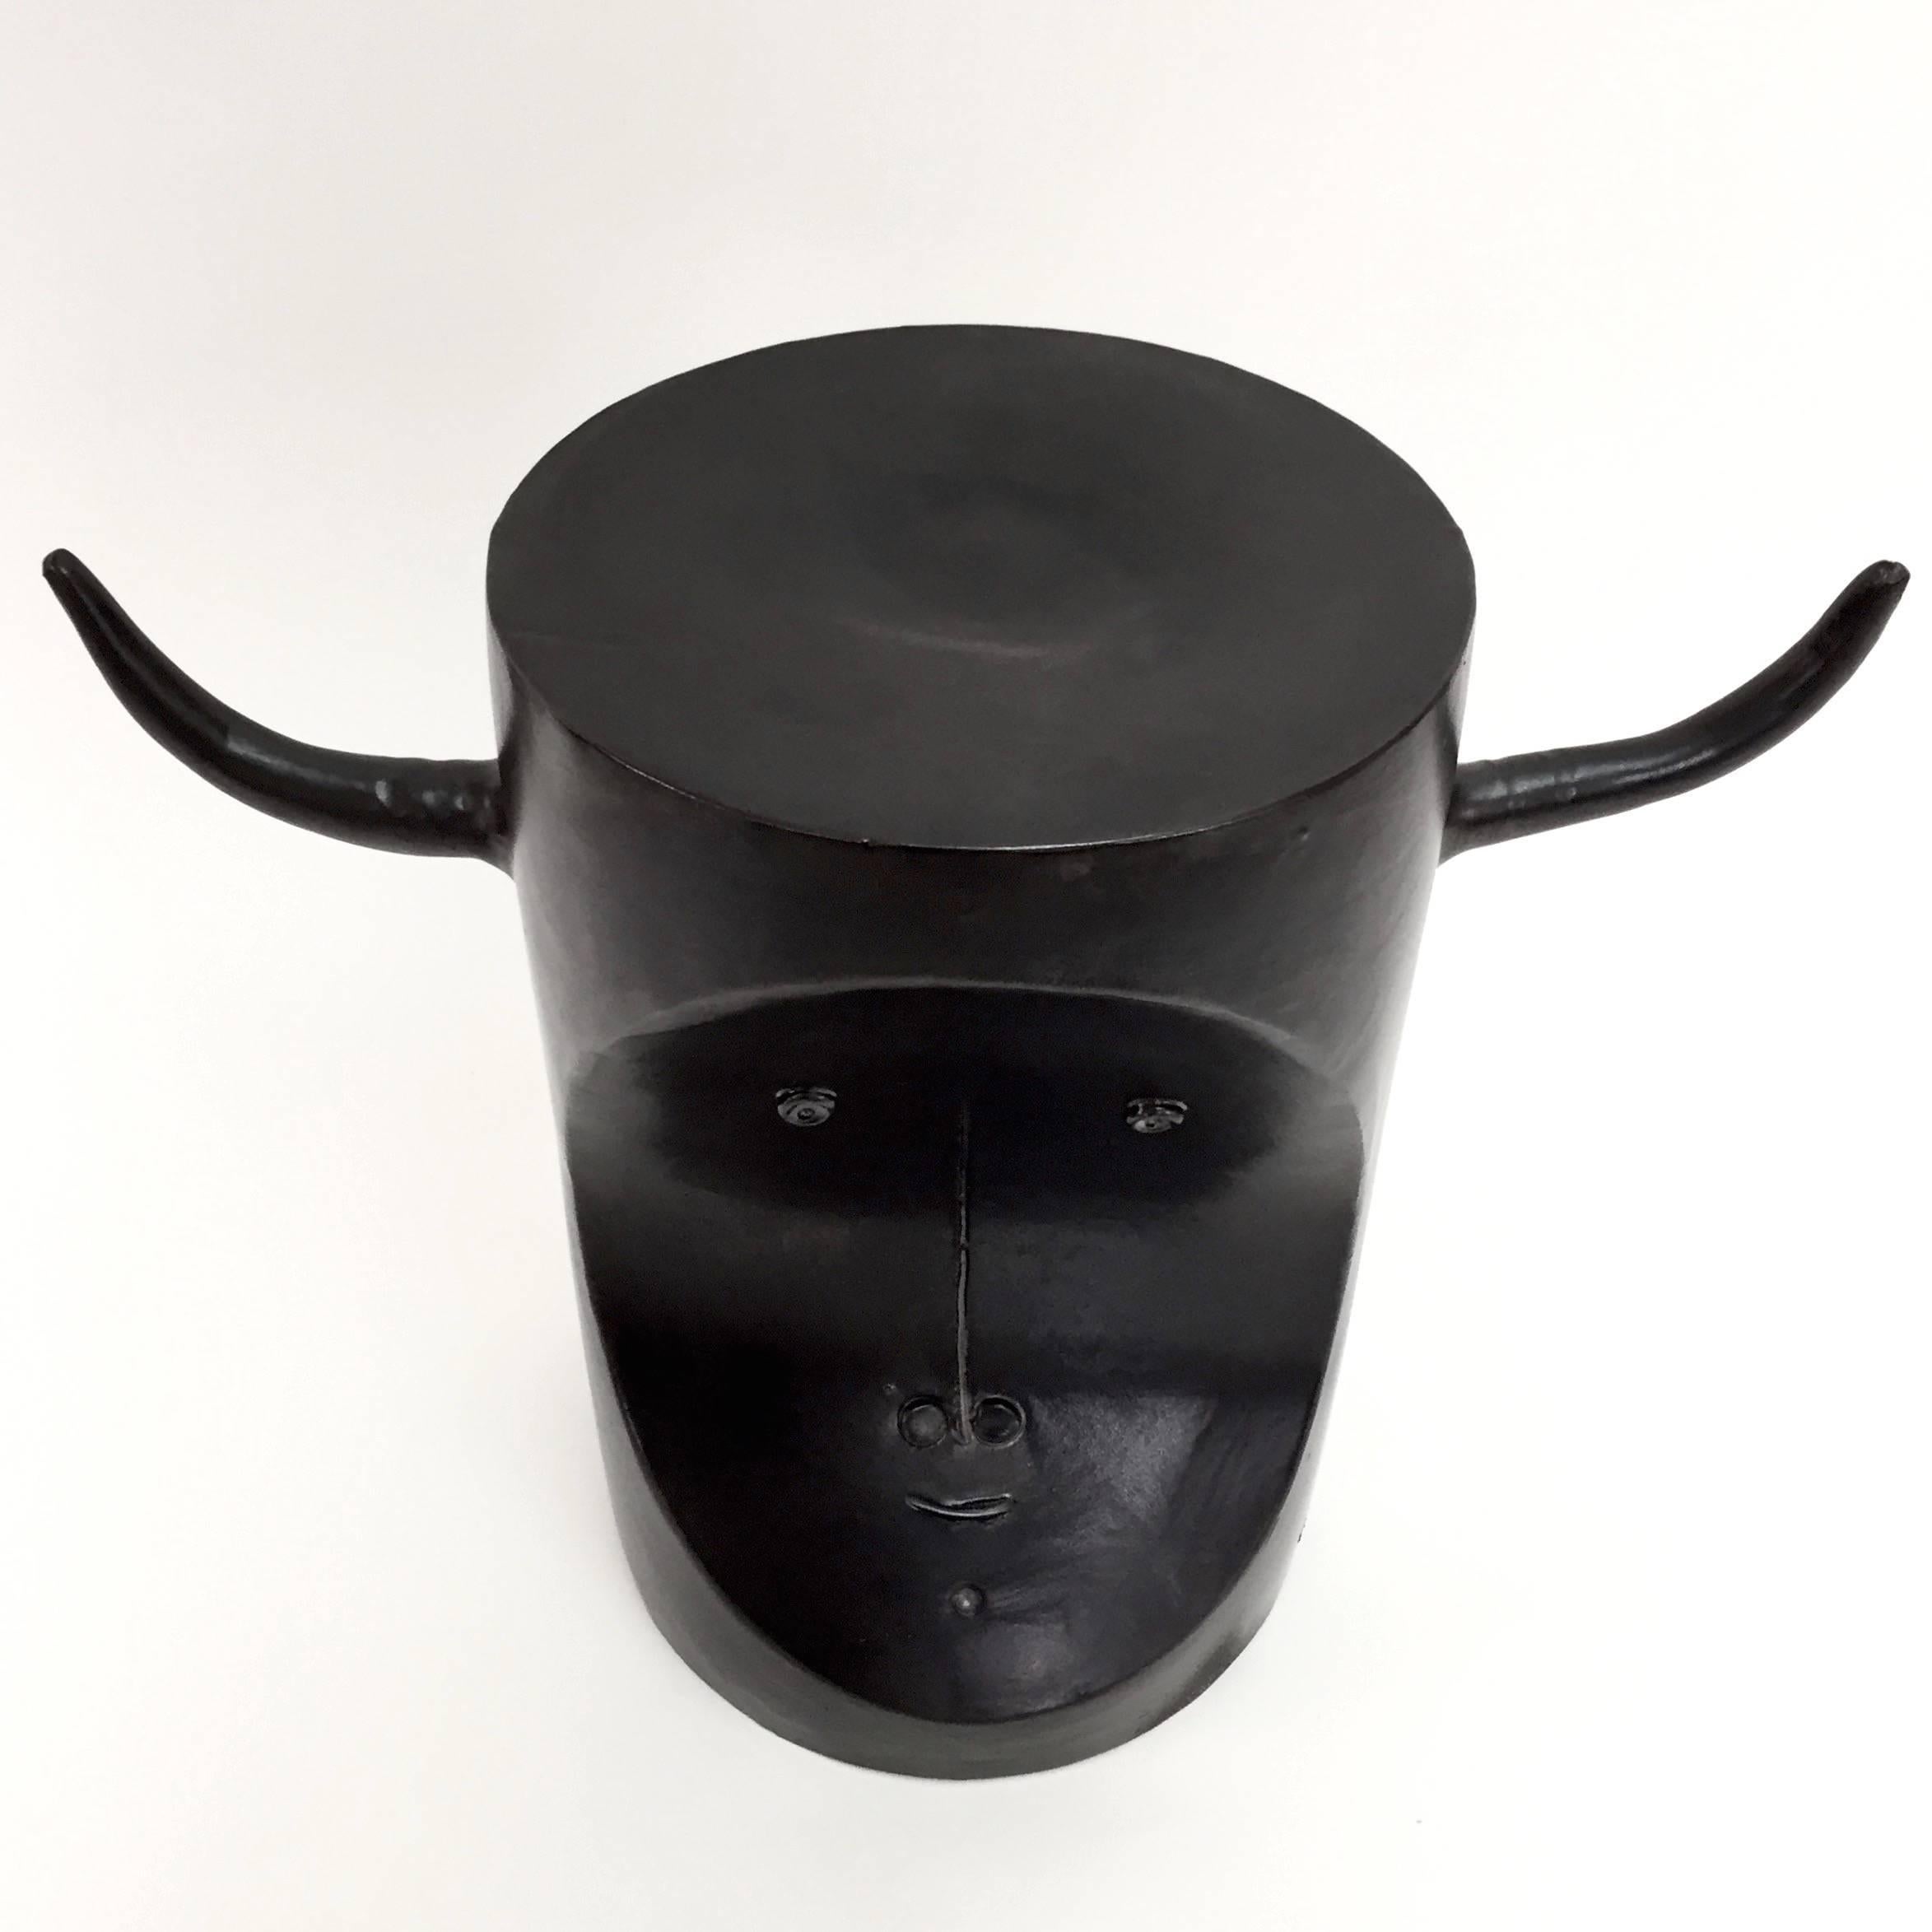 Enameled Robert and Jean Cloutier, Ceramic Bull Sculpture Glazed in Black